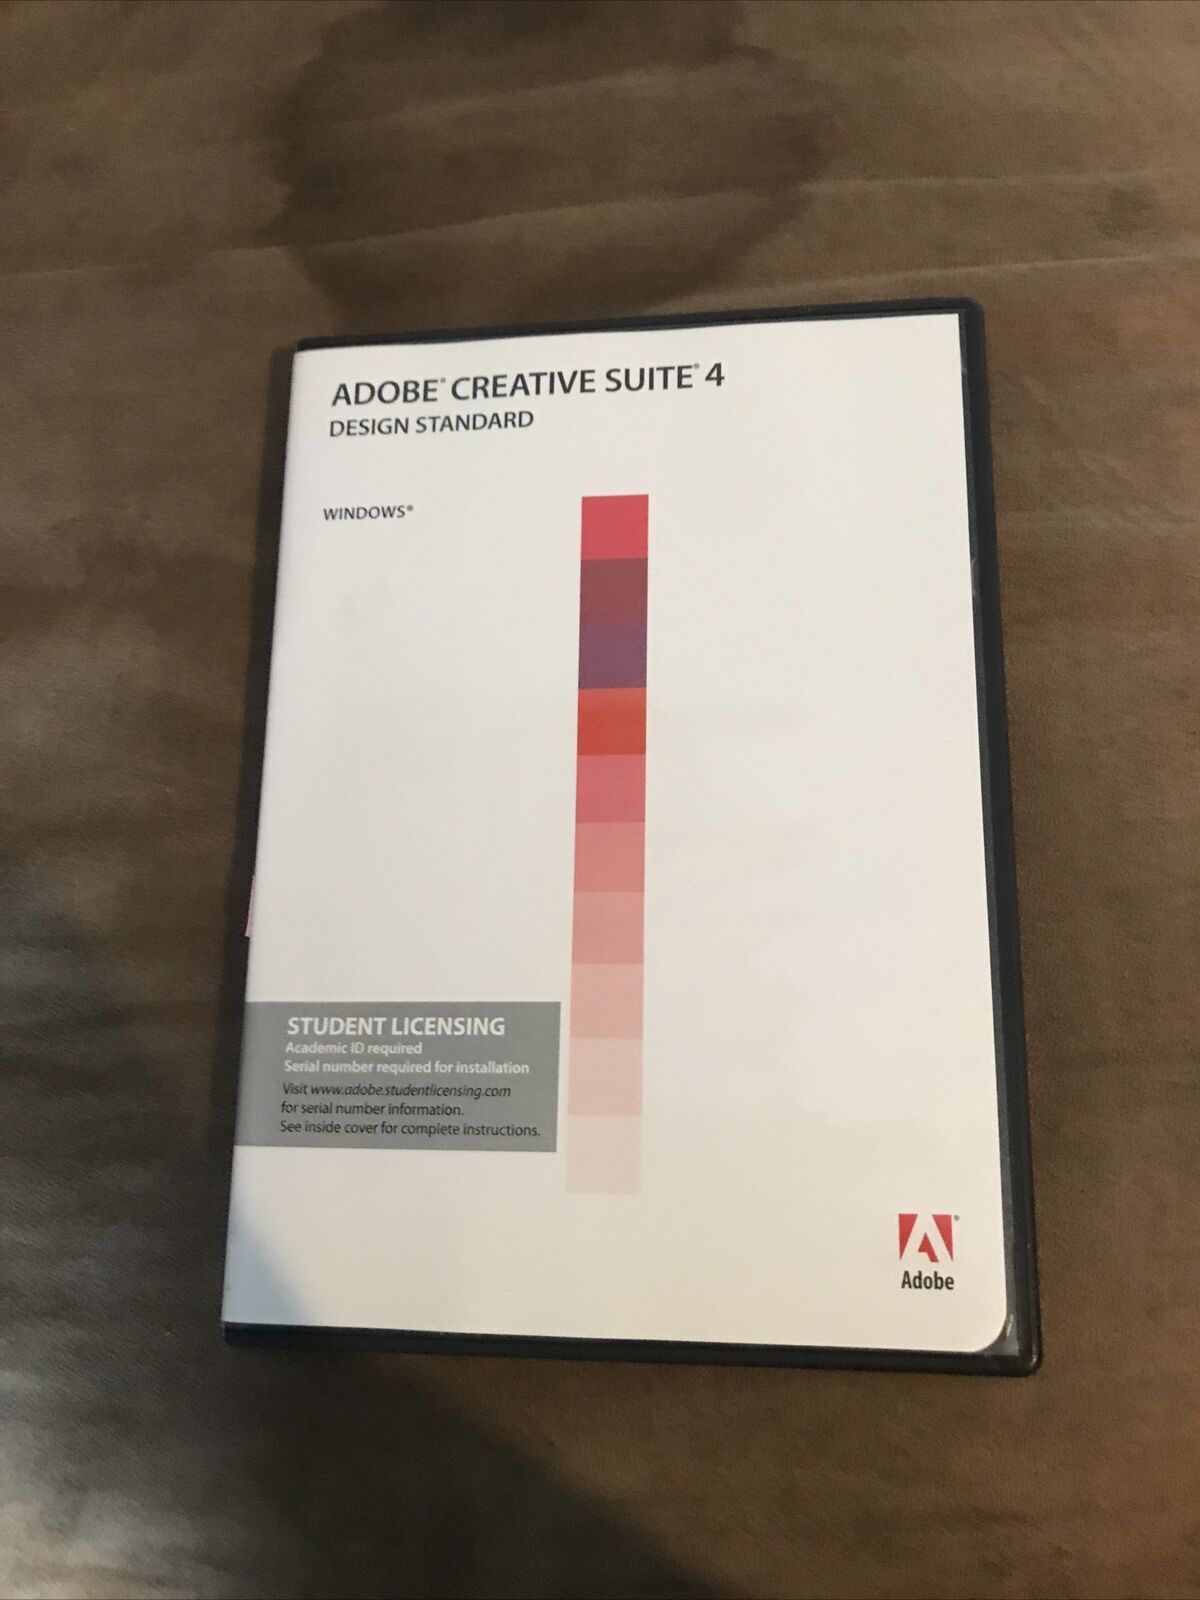 Adobe Creative Suite 4 Design Standard Windows with Serial Number